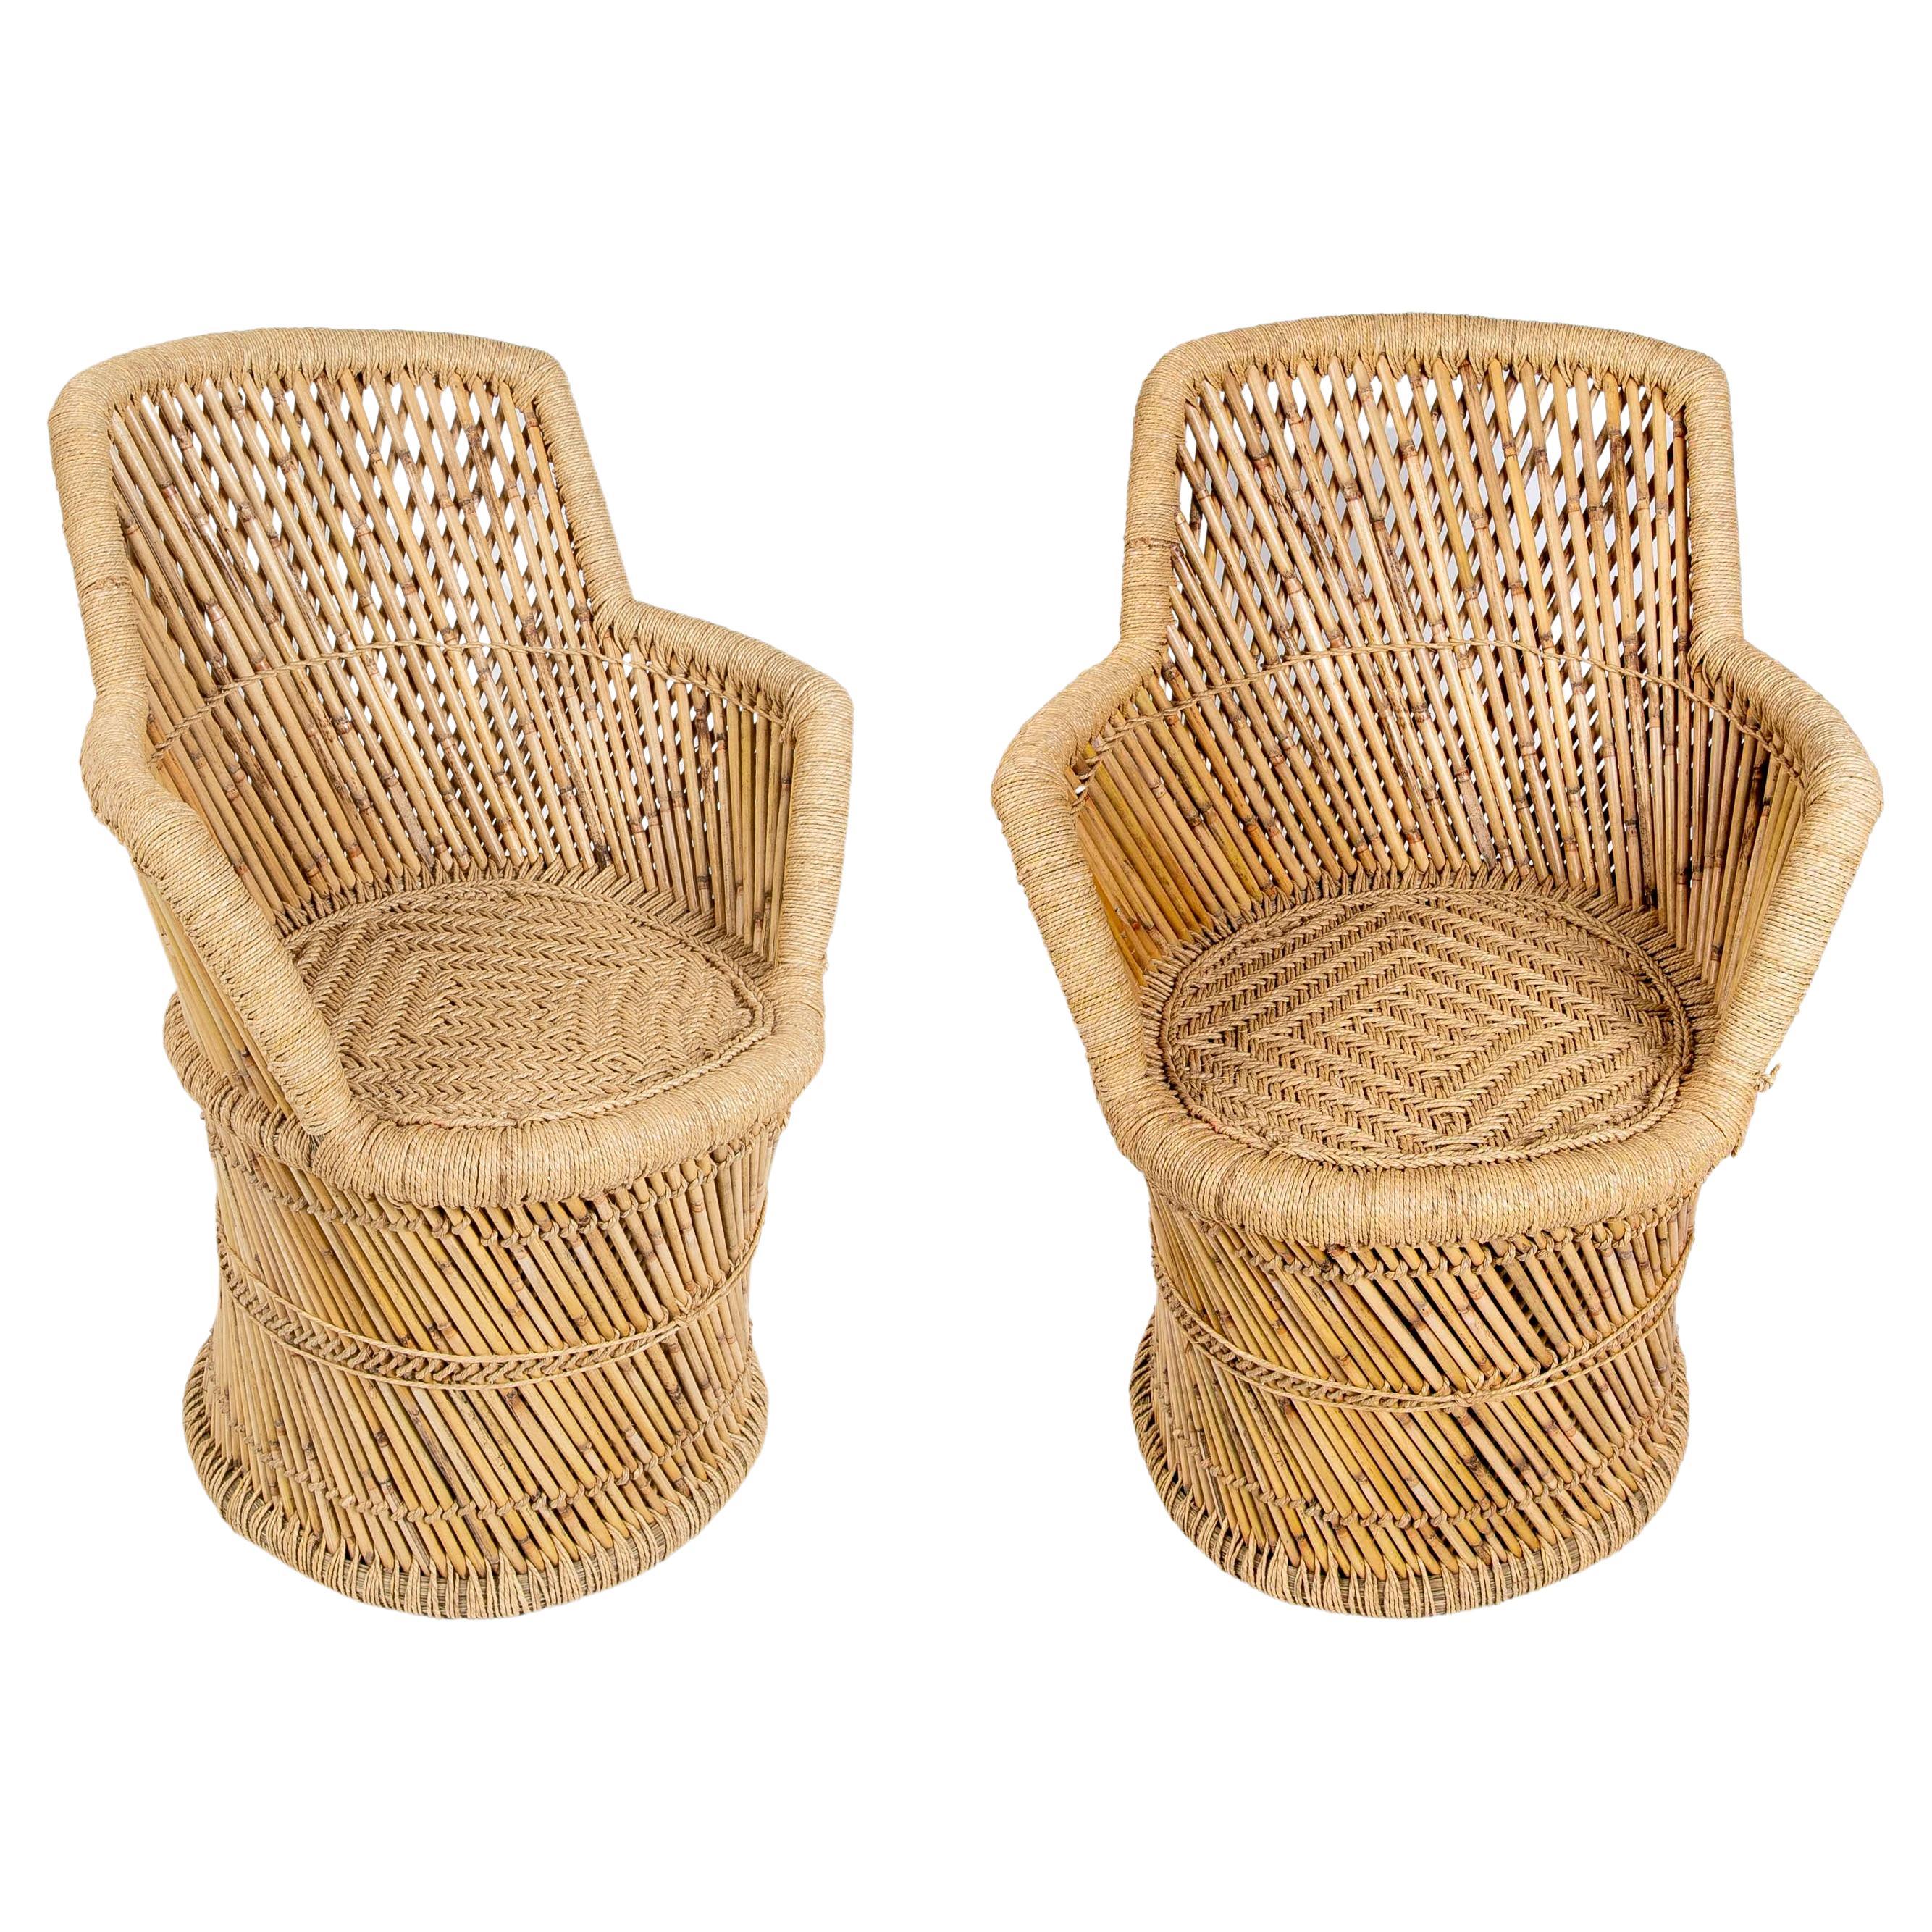 Pair of Hand-Stitched Bamboo and Rope Armchairs For Sale